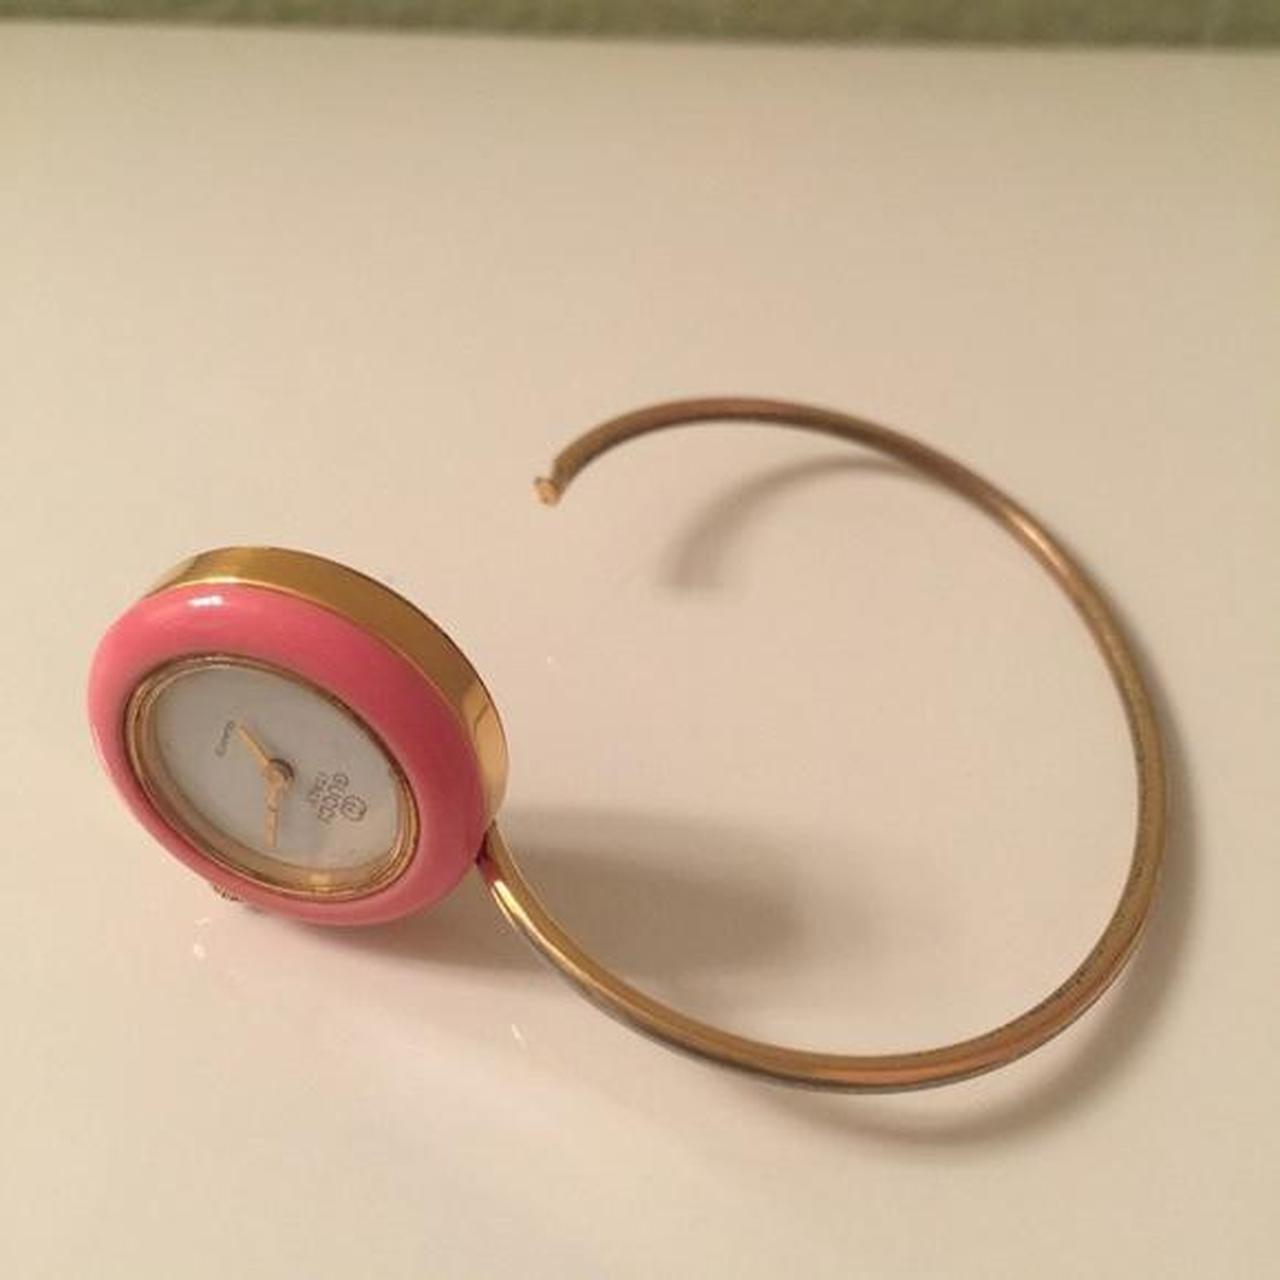 Gucci Women's Gold and Pink Watch (3)